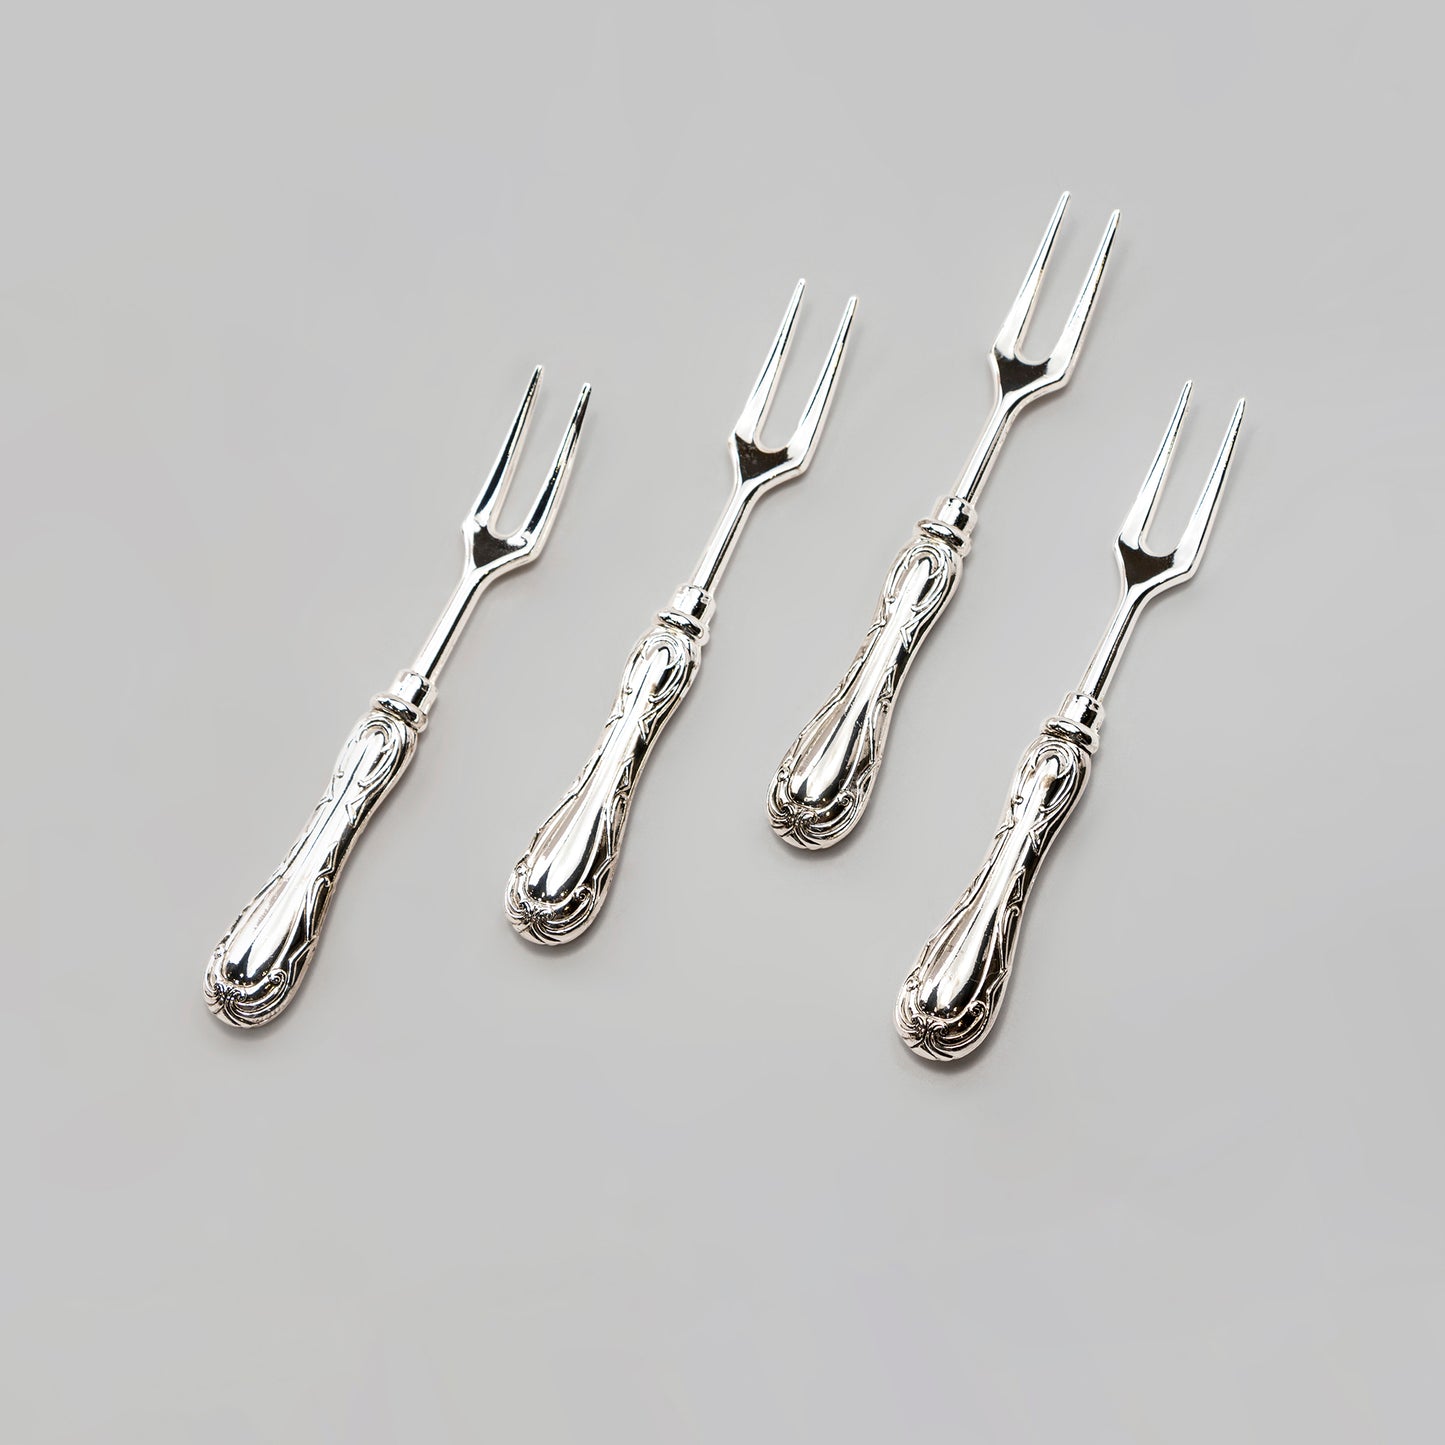 Silver Plated Fork Set of 4 with Scroll Decor Handle Design